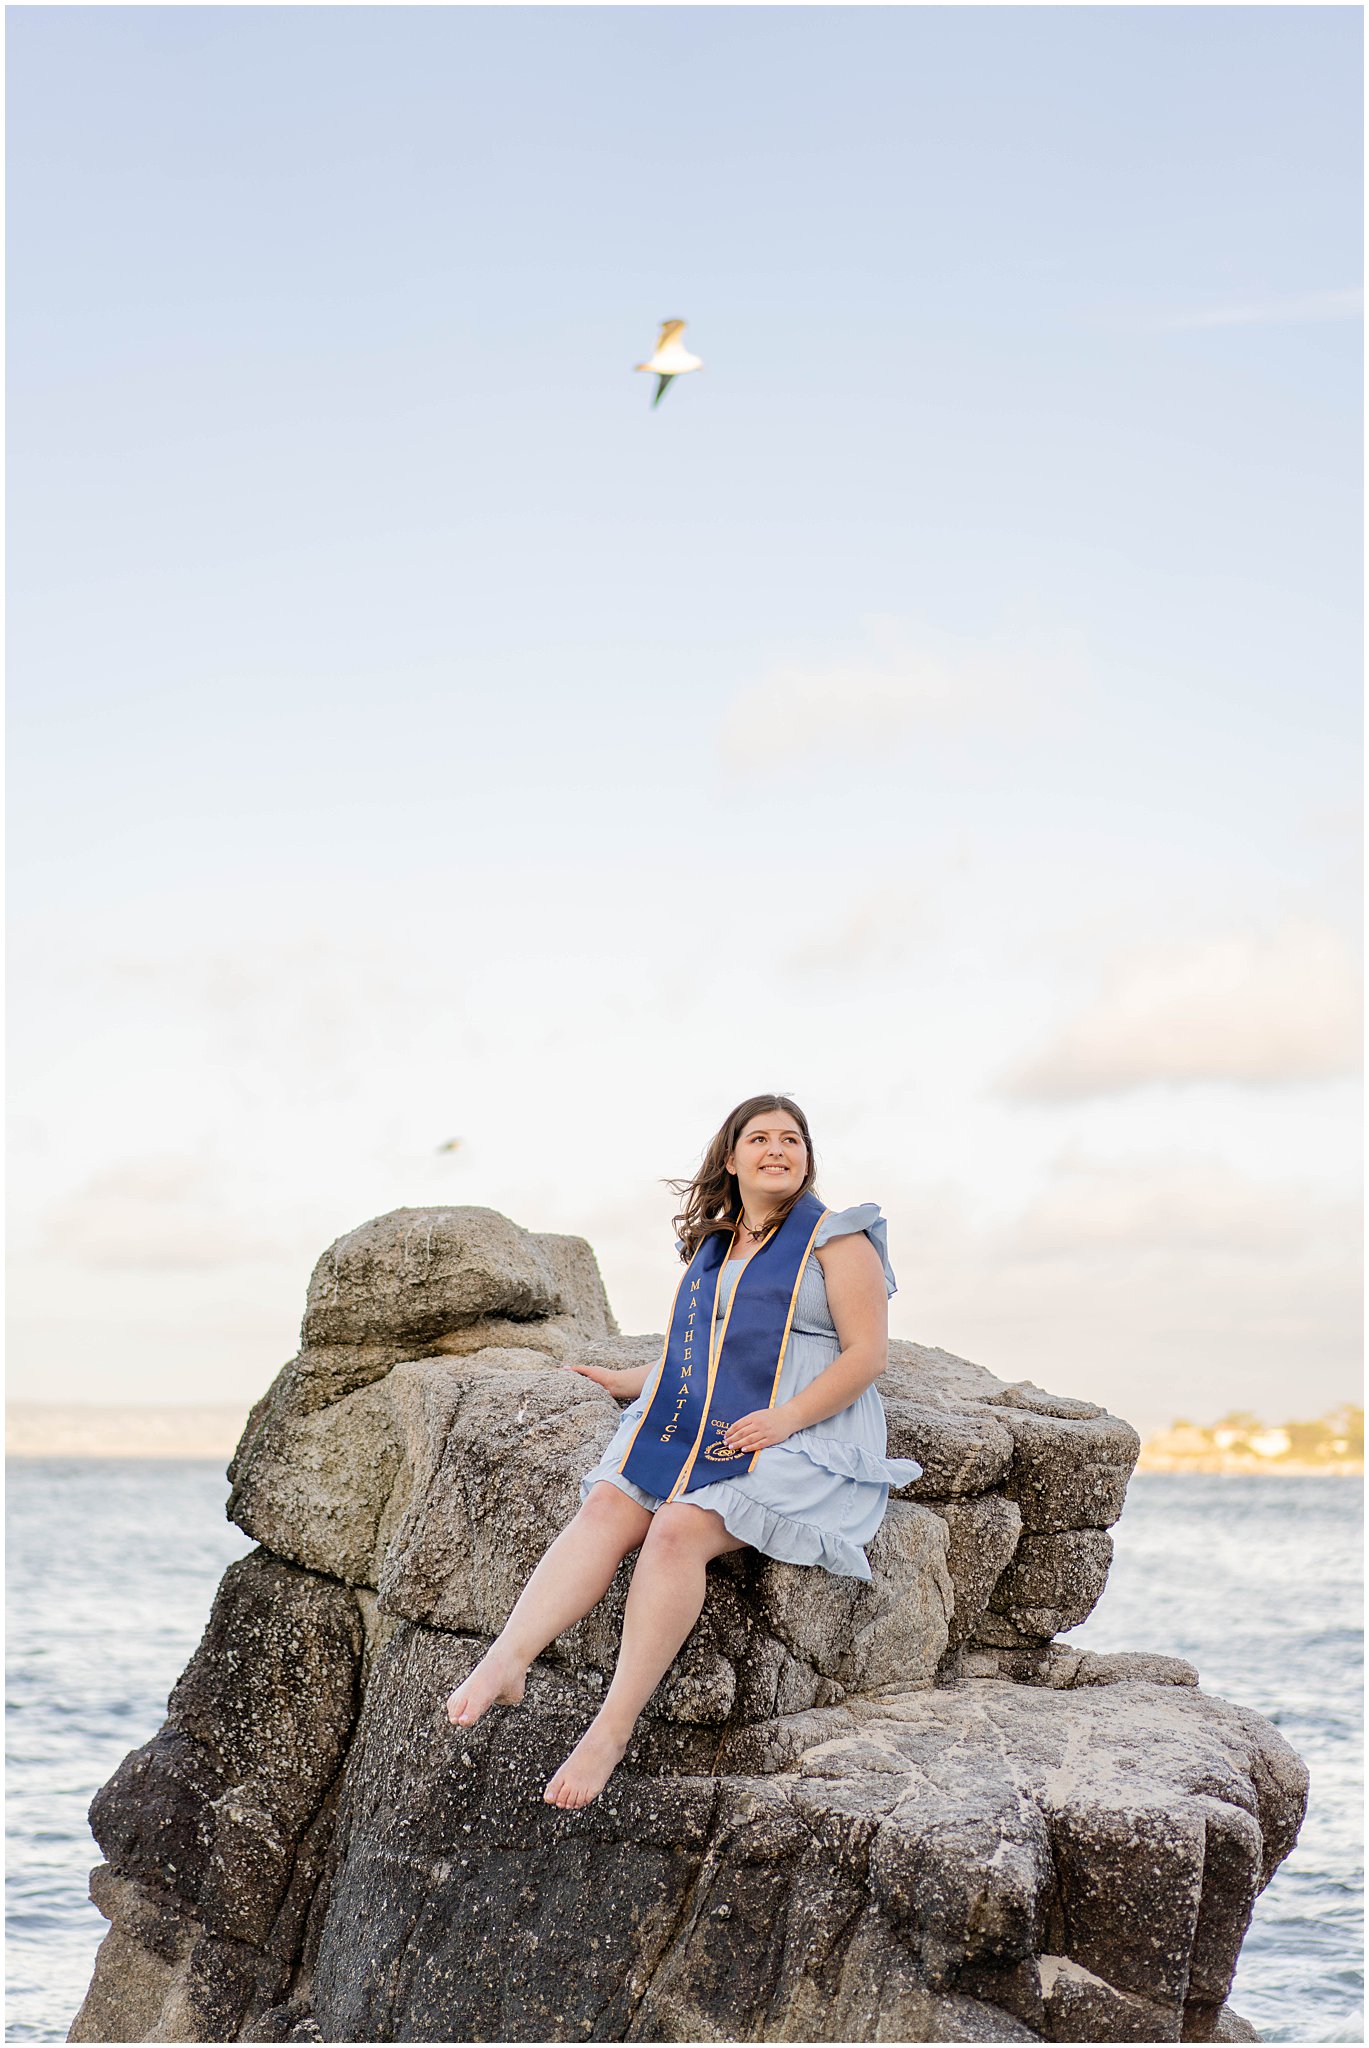 college graduate woman sits on a tall rock overlooking the pacific ocean with seagulls flying above her